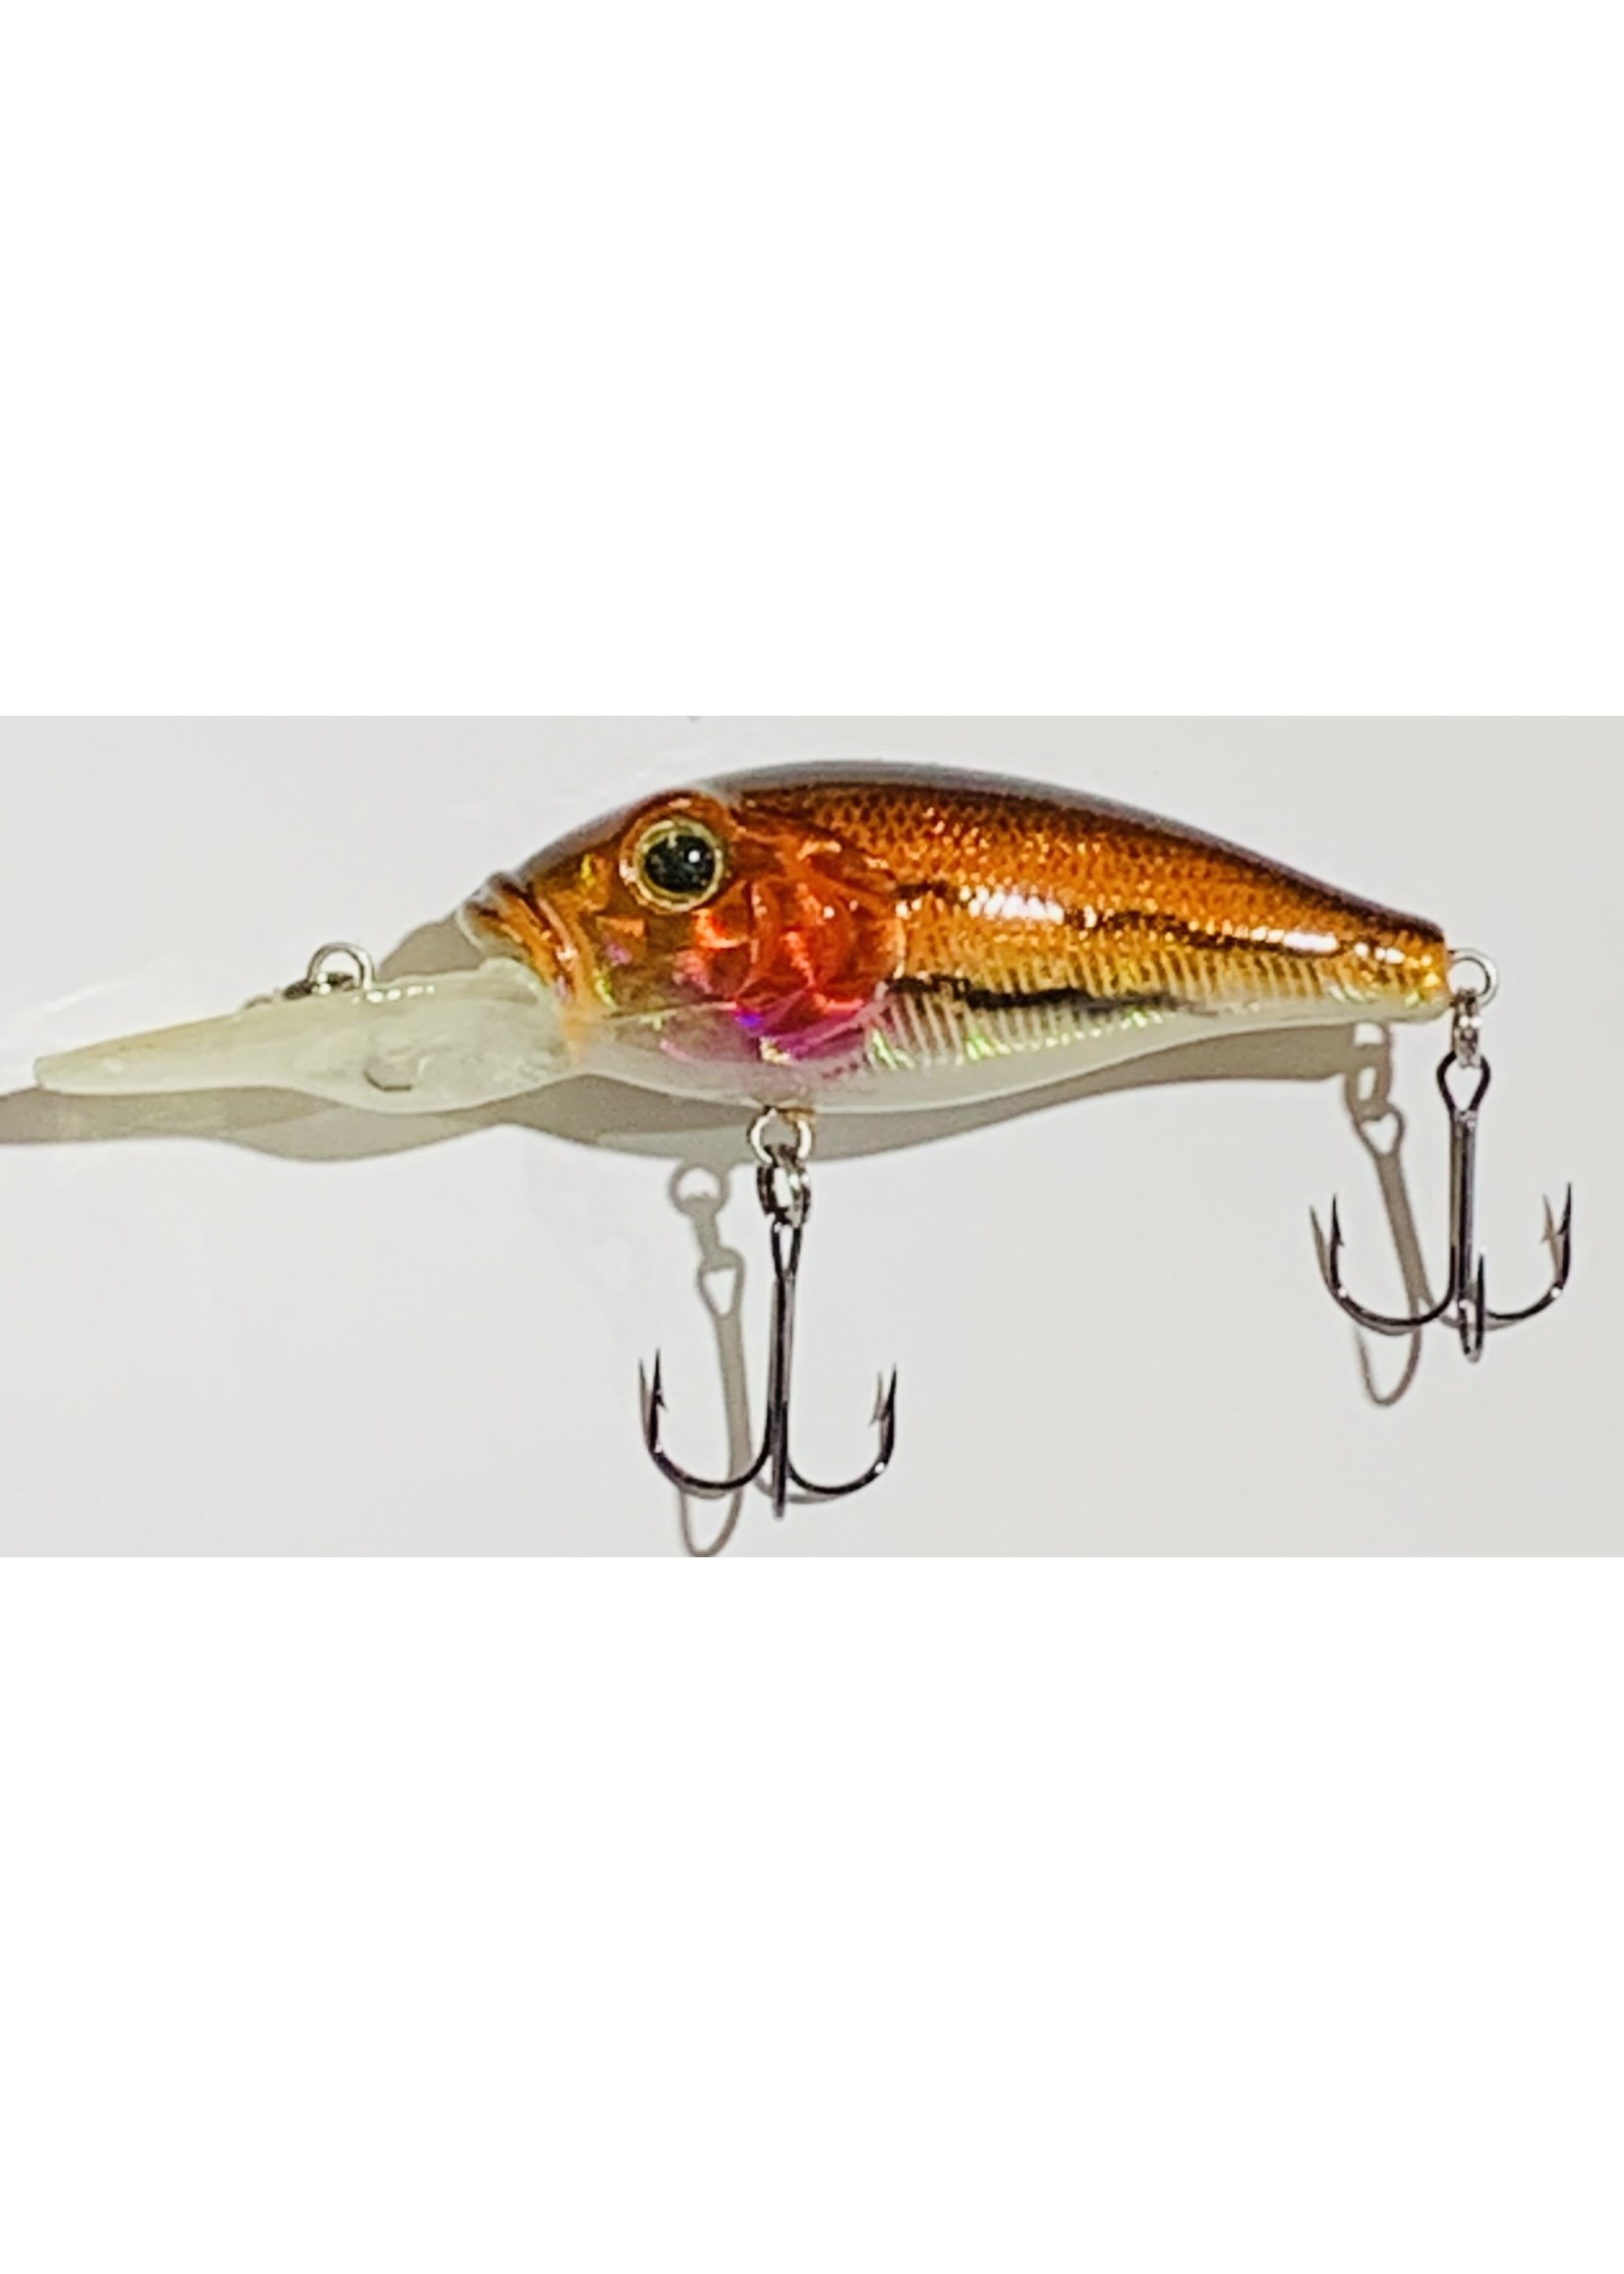 BELL OUTDOOR PRODUCTS SILVER CREEK LURE DEEP CRANK 6.5cm DIVE 3-5 FT